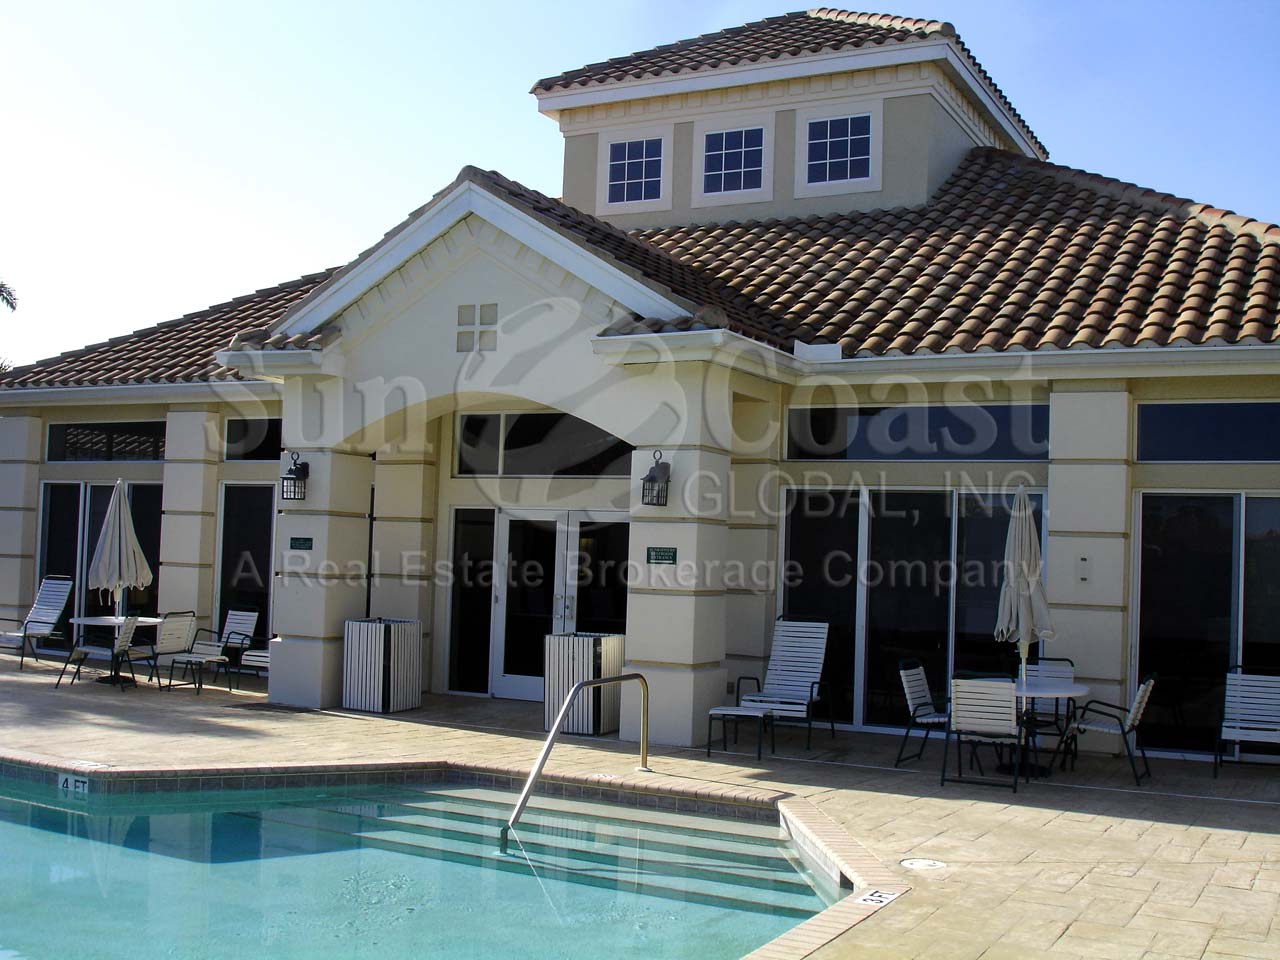 Wellington Place II Community Clubhouse and Pool